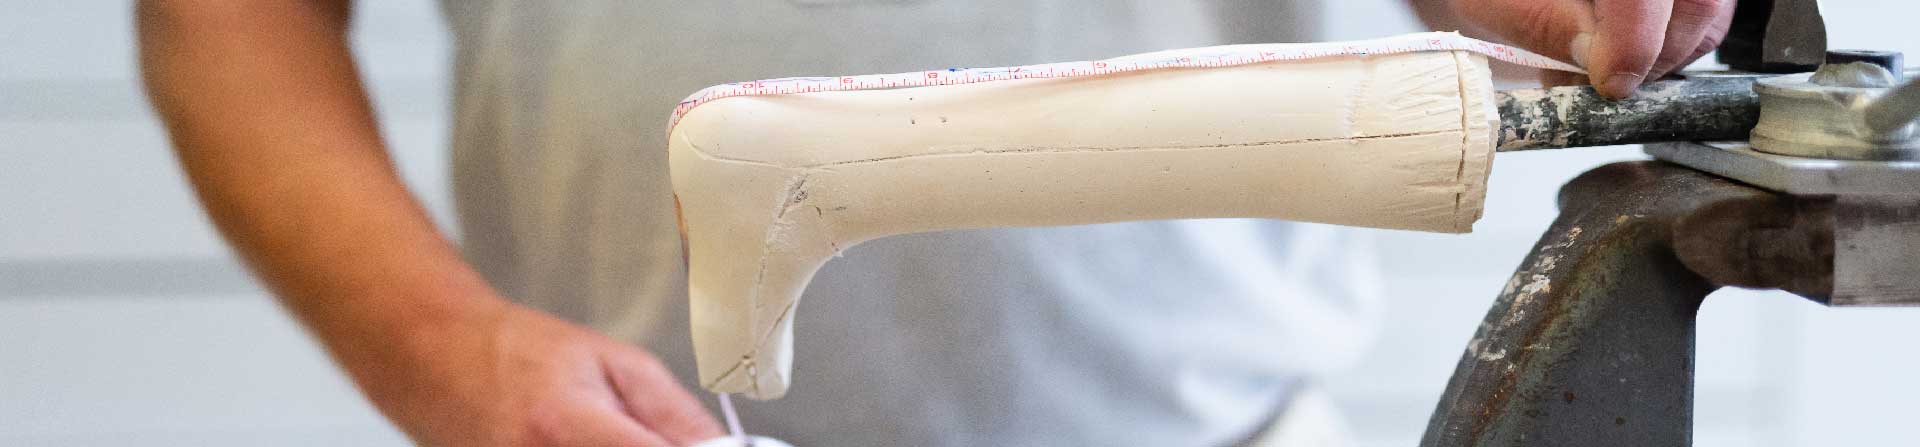 A prosthetics specialist measuring a mold for a child's prosthetic leg.